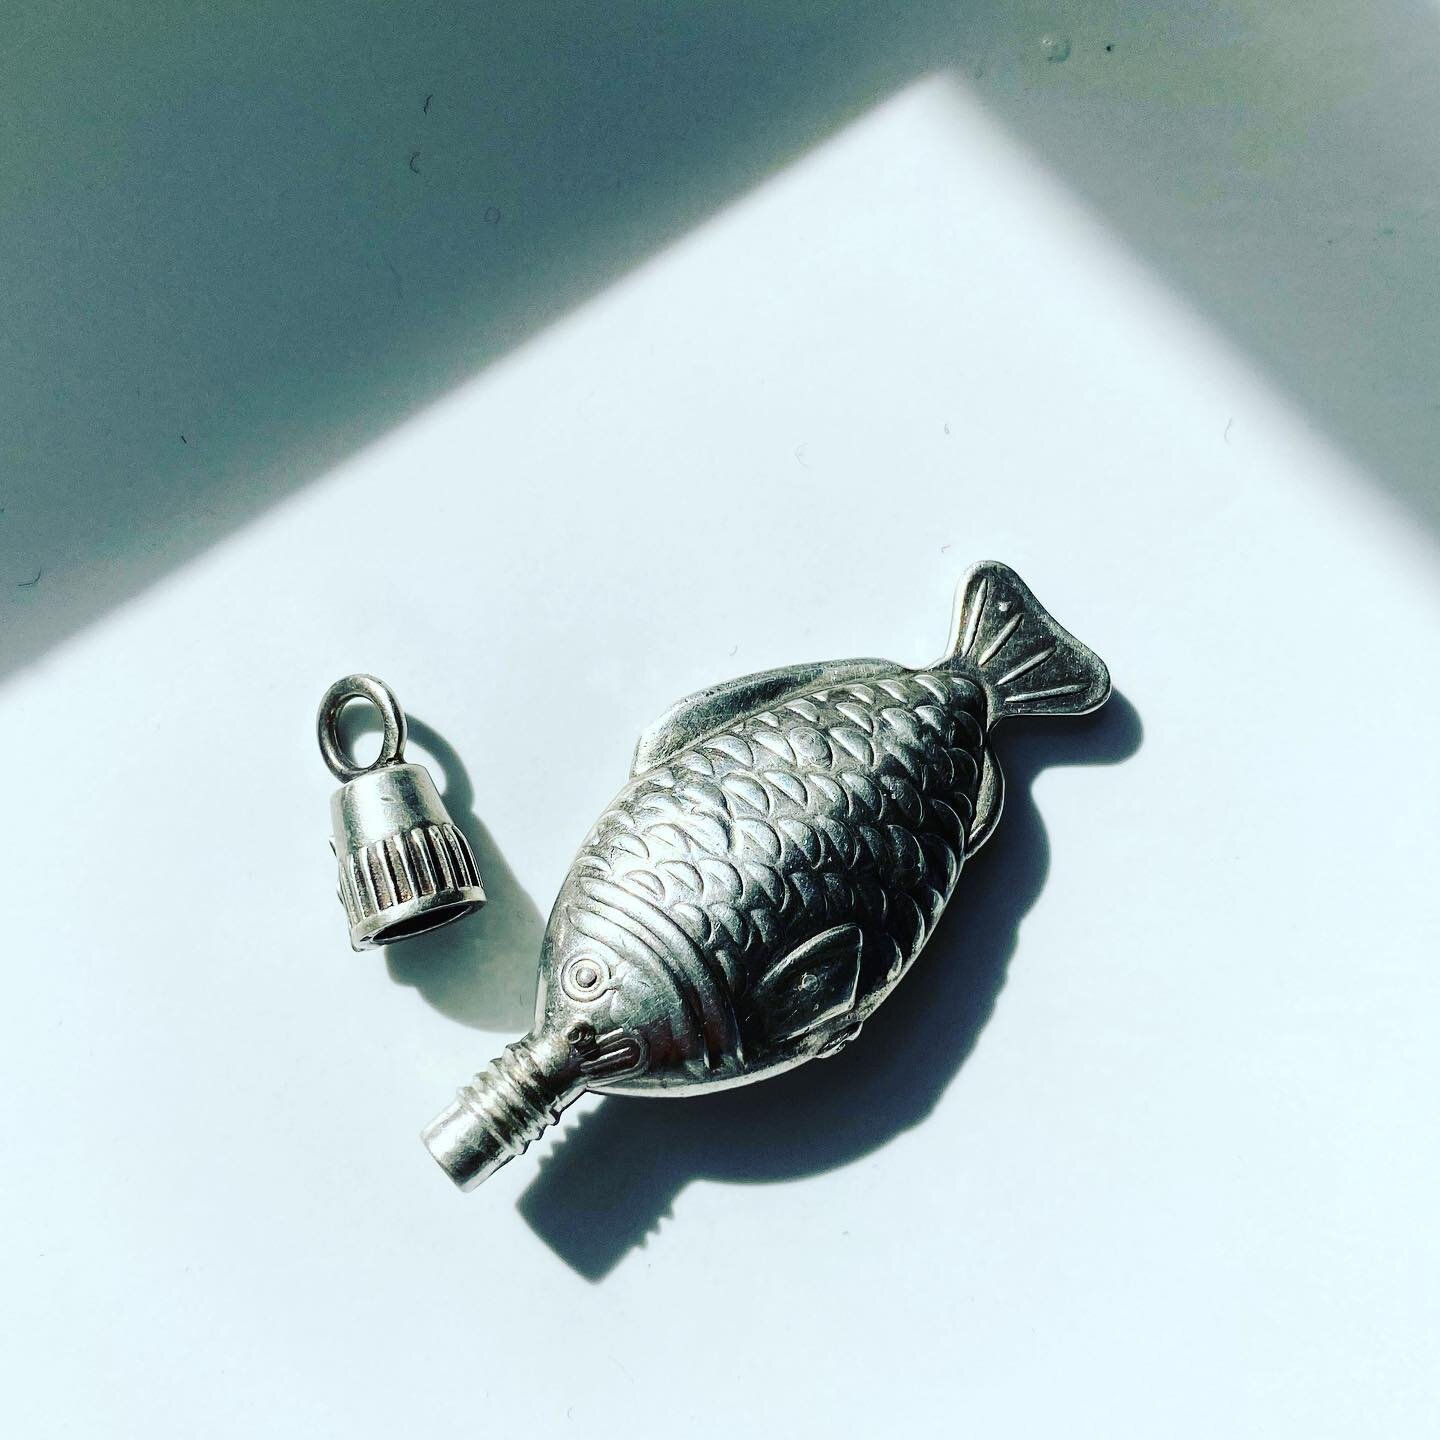 The Iconic soy sauce fish converted into a beautiful wearable perfume pendant, ubiquitous Japanese style in sterling silver by Melbourne Master Jeweller Infinity... check it out on the Accessory Emergency Curated page #japanesestyle #japaneseinfluenc